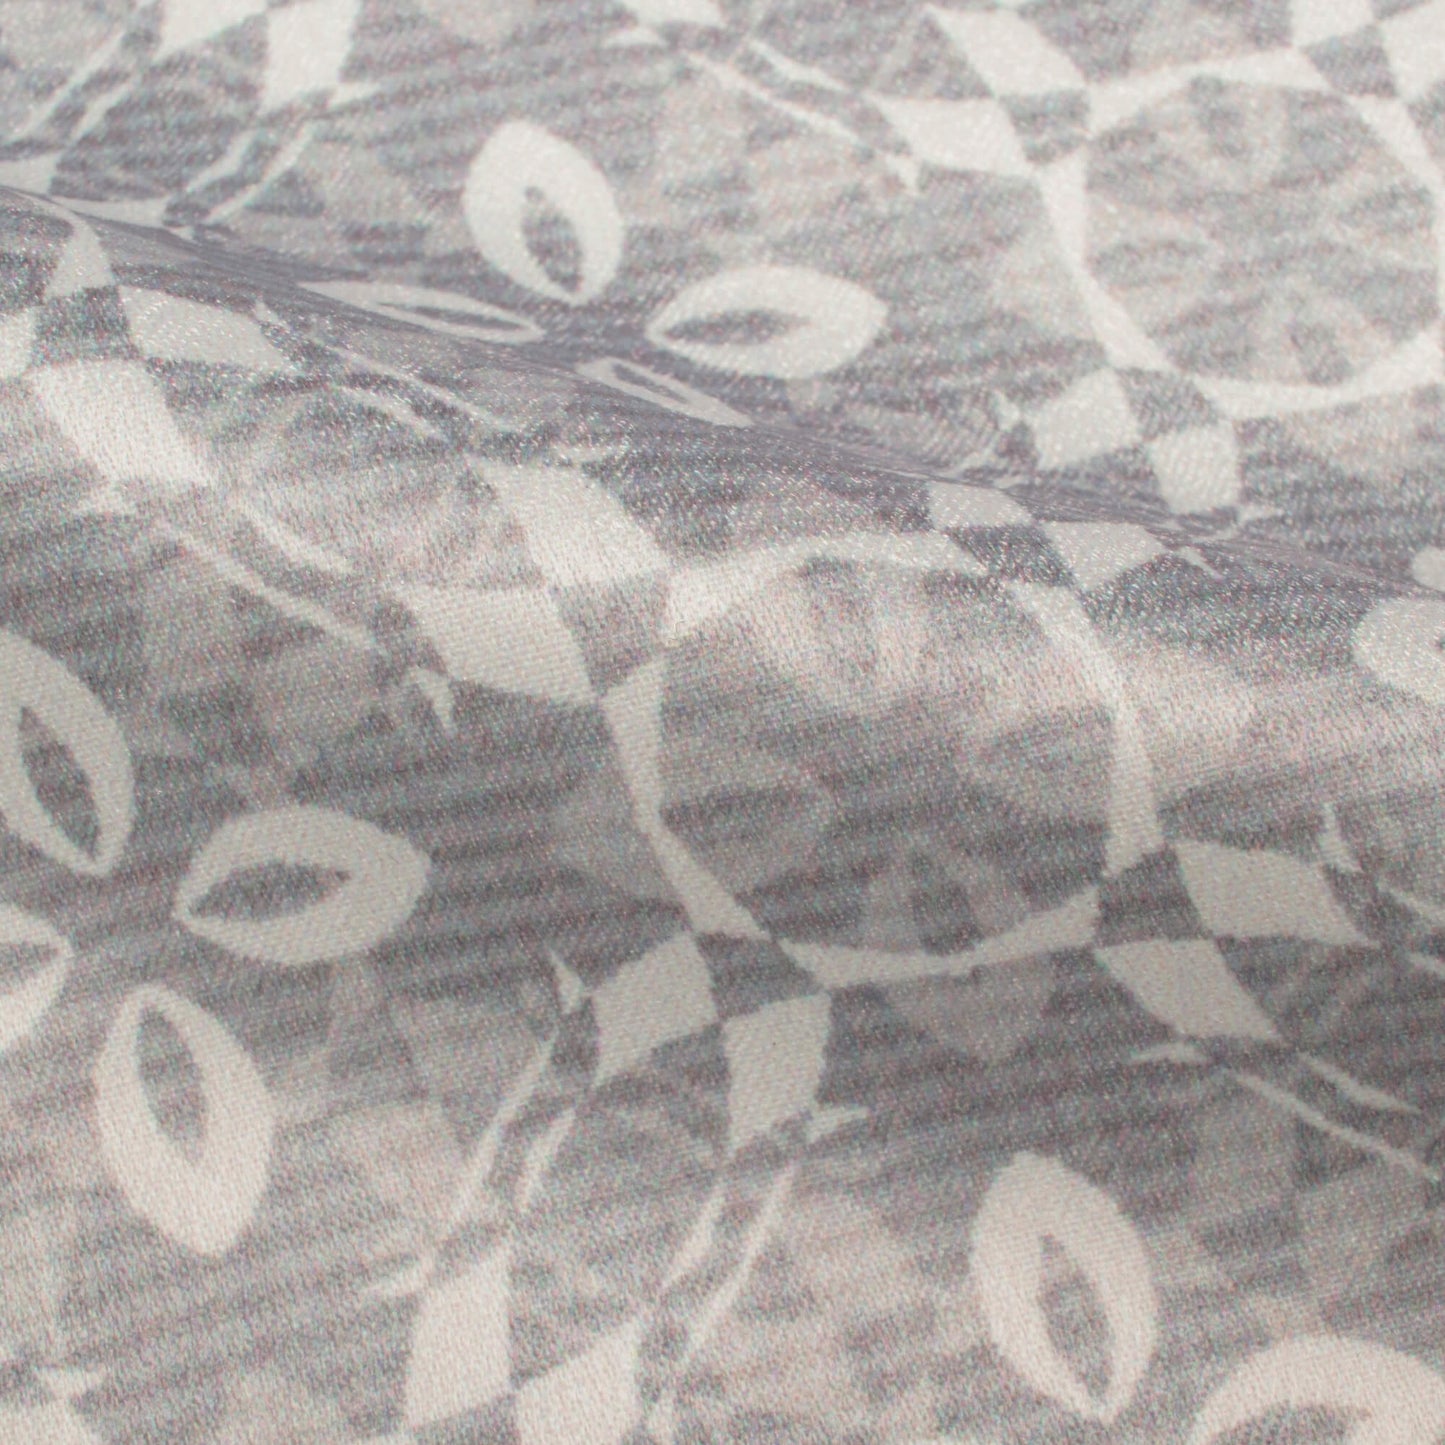 Dolphin Grey And White Floral Pattern Digital Print Lush Satin Fabric